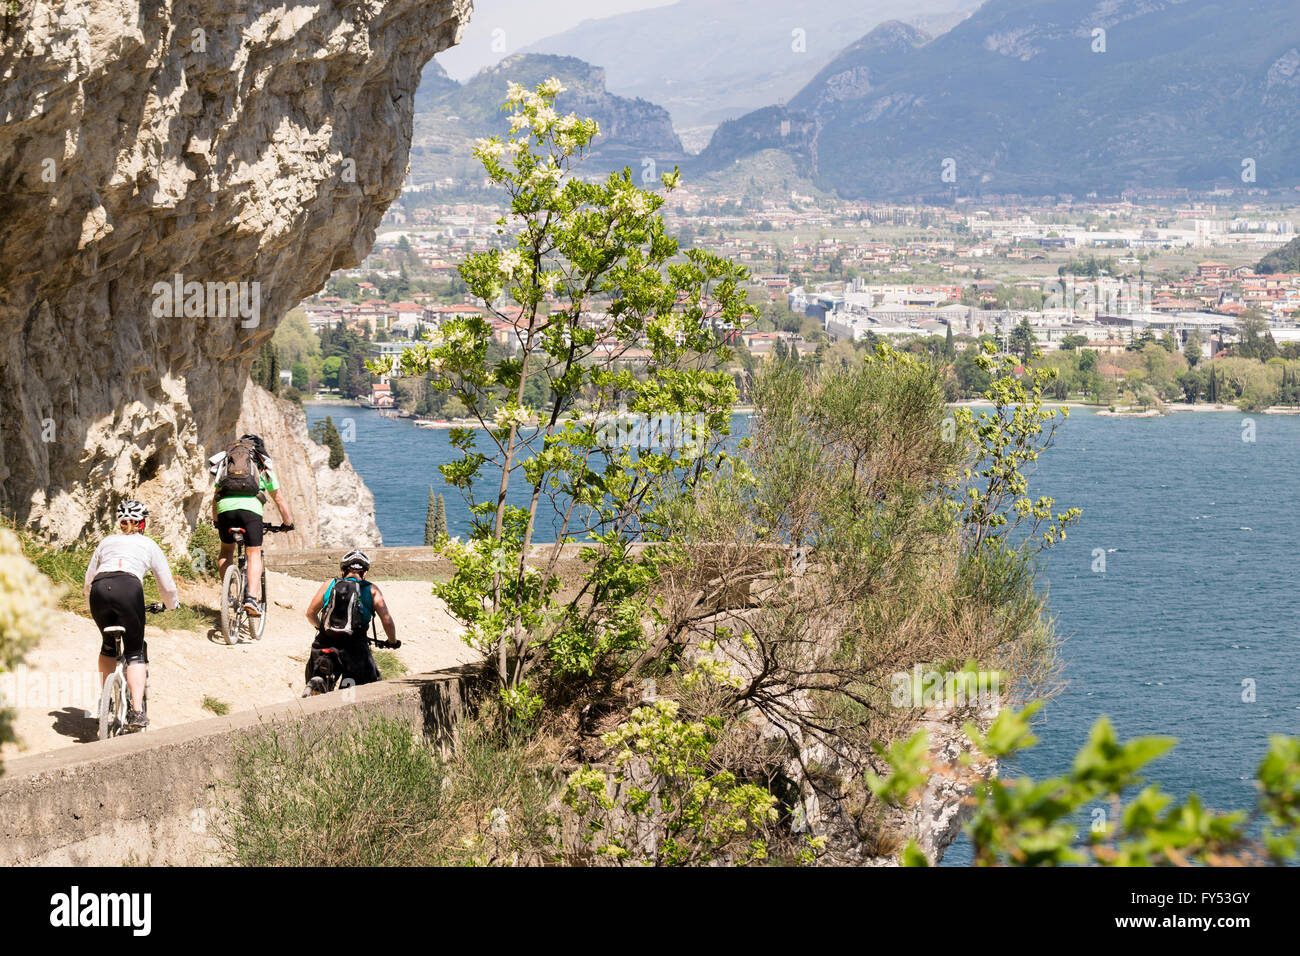 Cyclists run through the Ponale trail carved into the rock of the mountain in Riva del Garda, Italy. Stock Photo